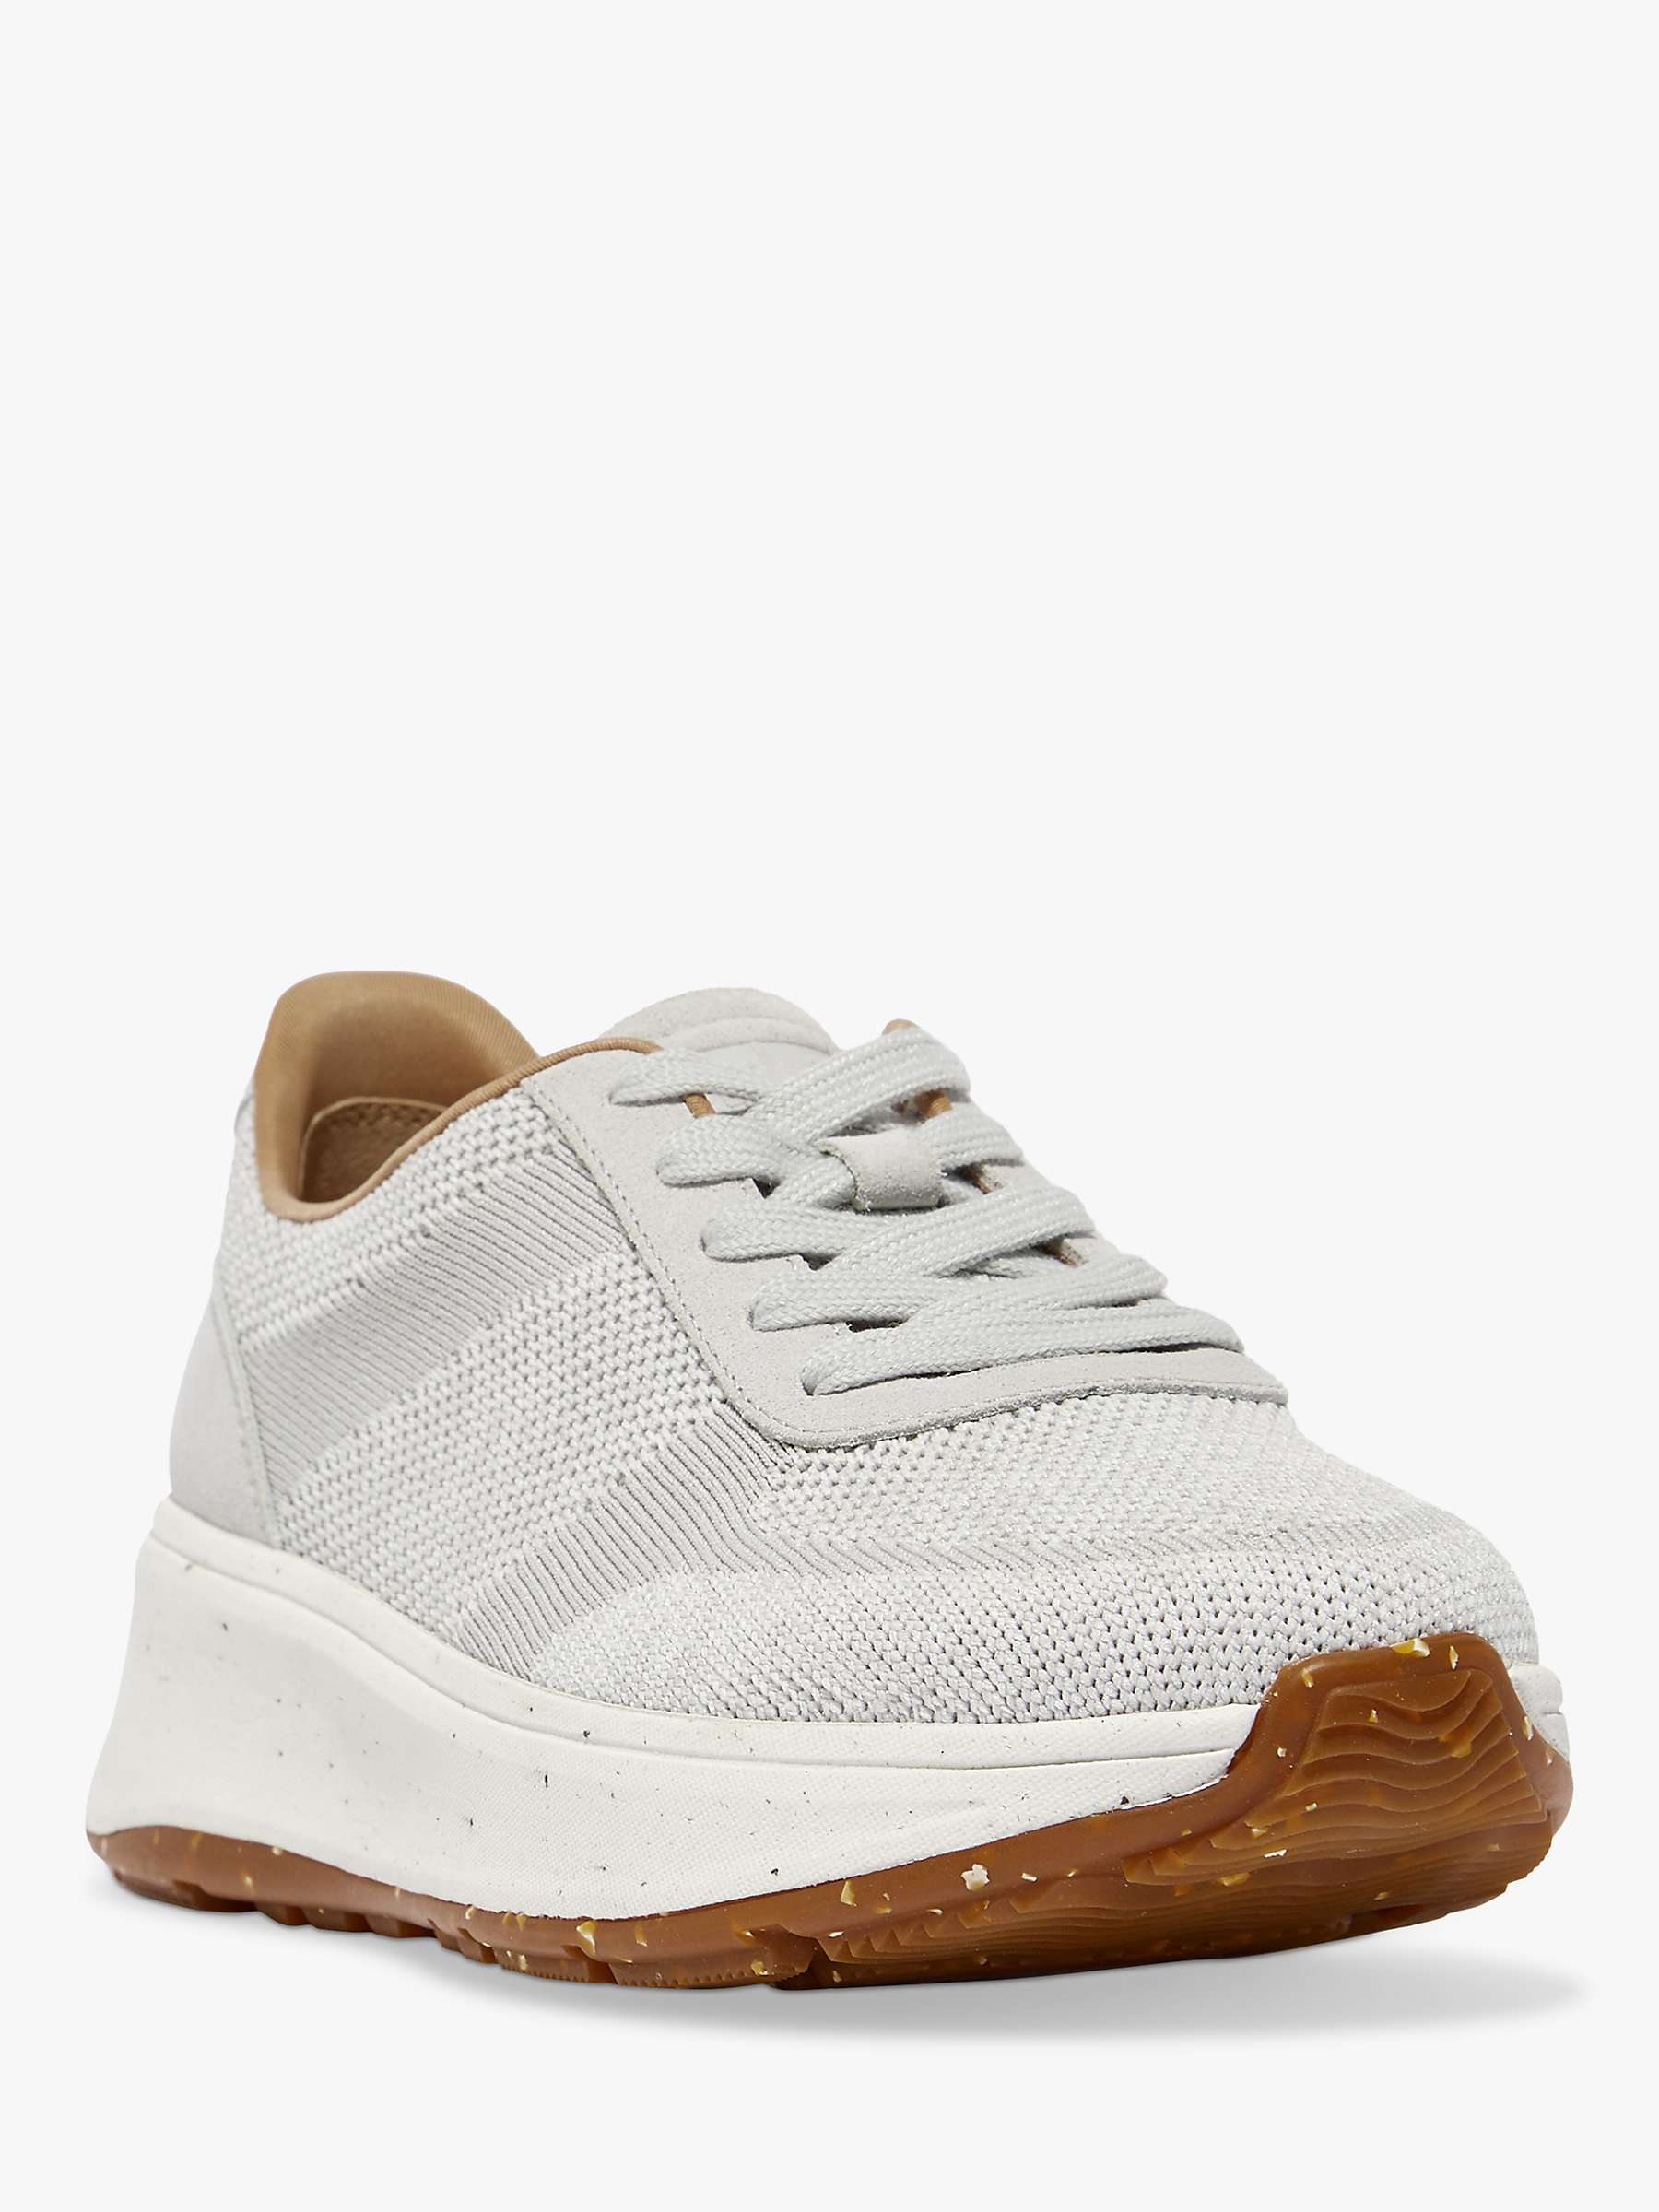 Buy FitFlop F-Mode Knitted Trainers Online at johnlewis.com